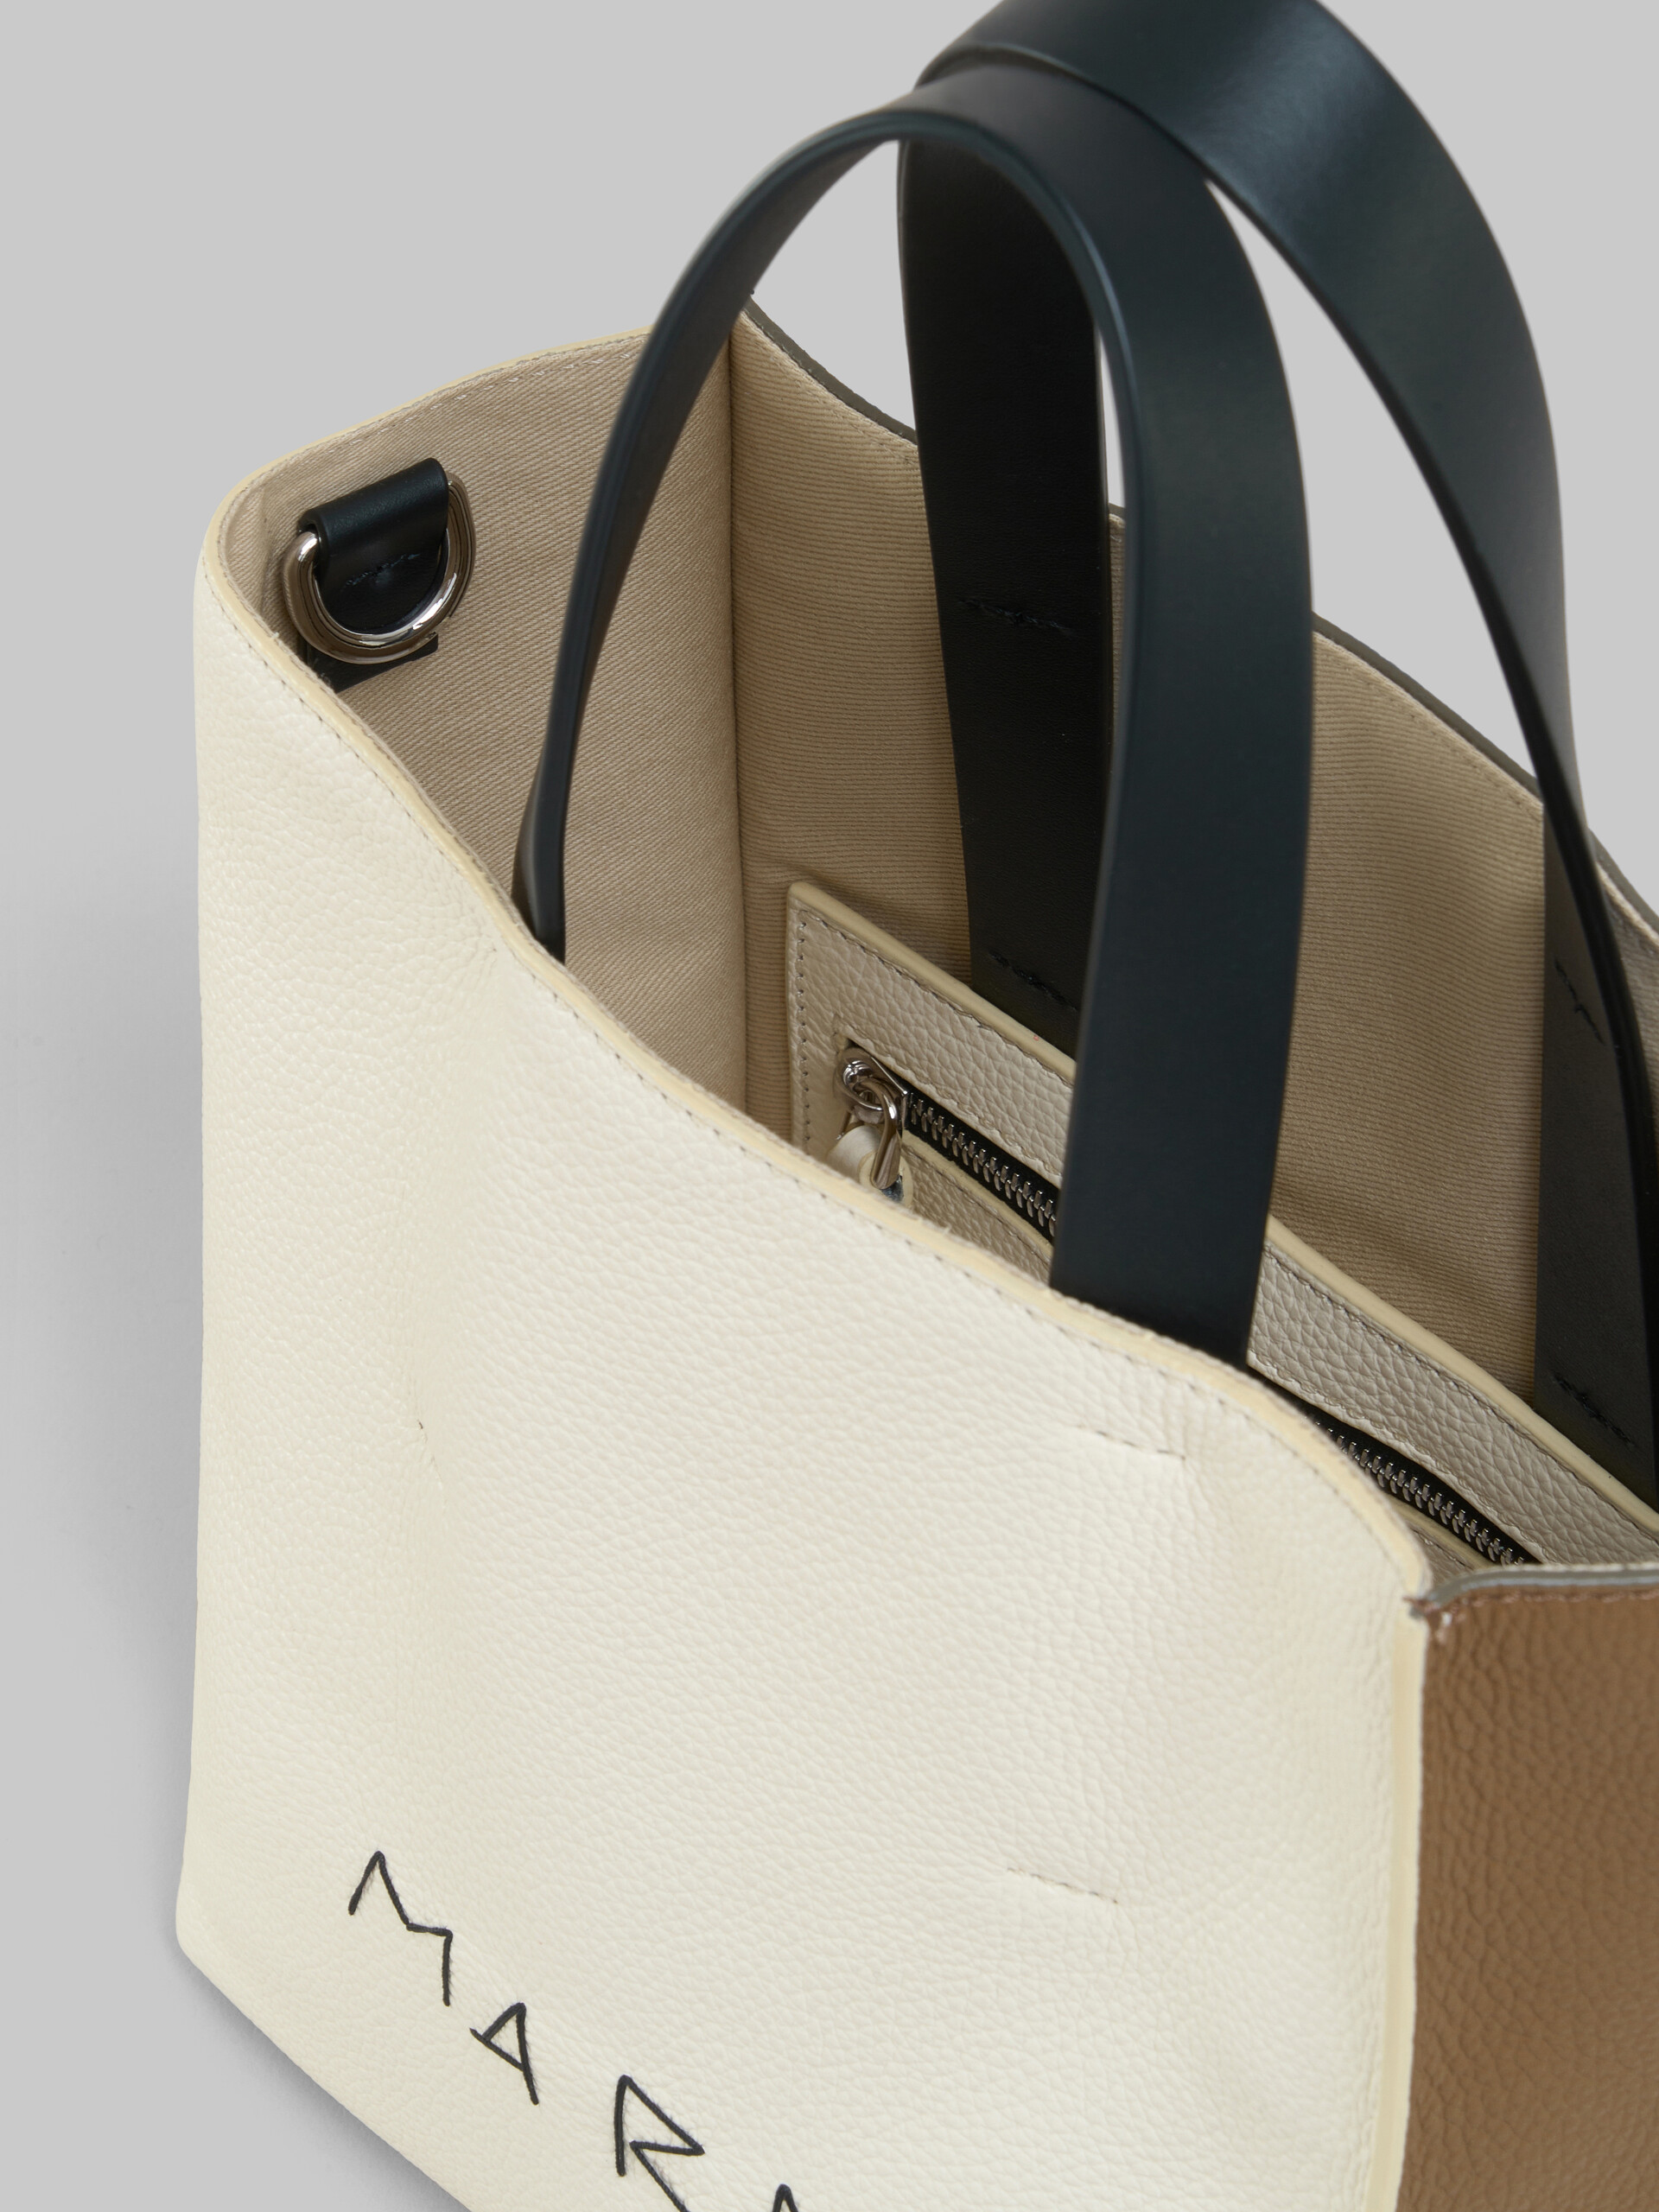 Museo Soft Mini Bag in ivory and brown leather with Marni mending - Shopping Bags - Image 4